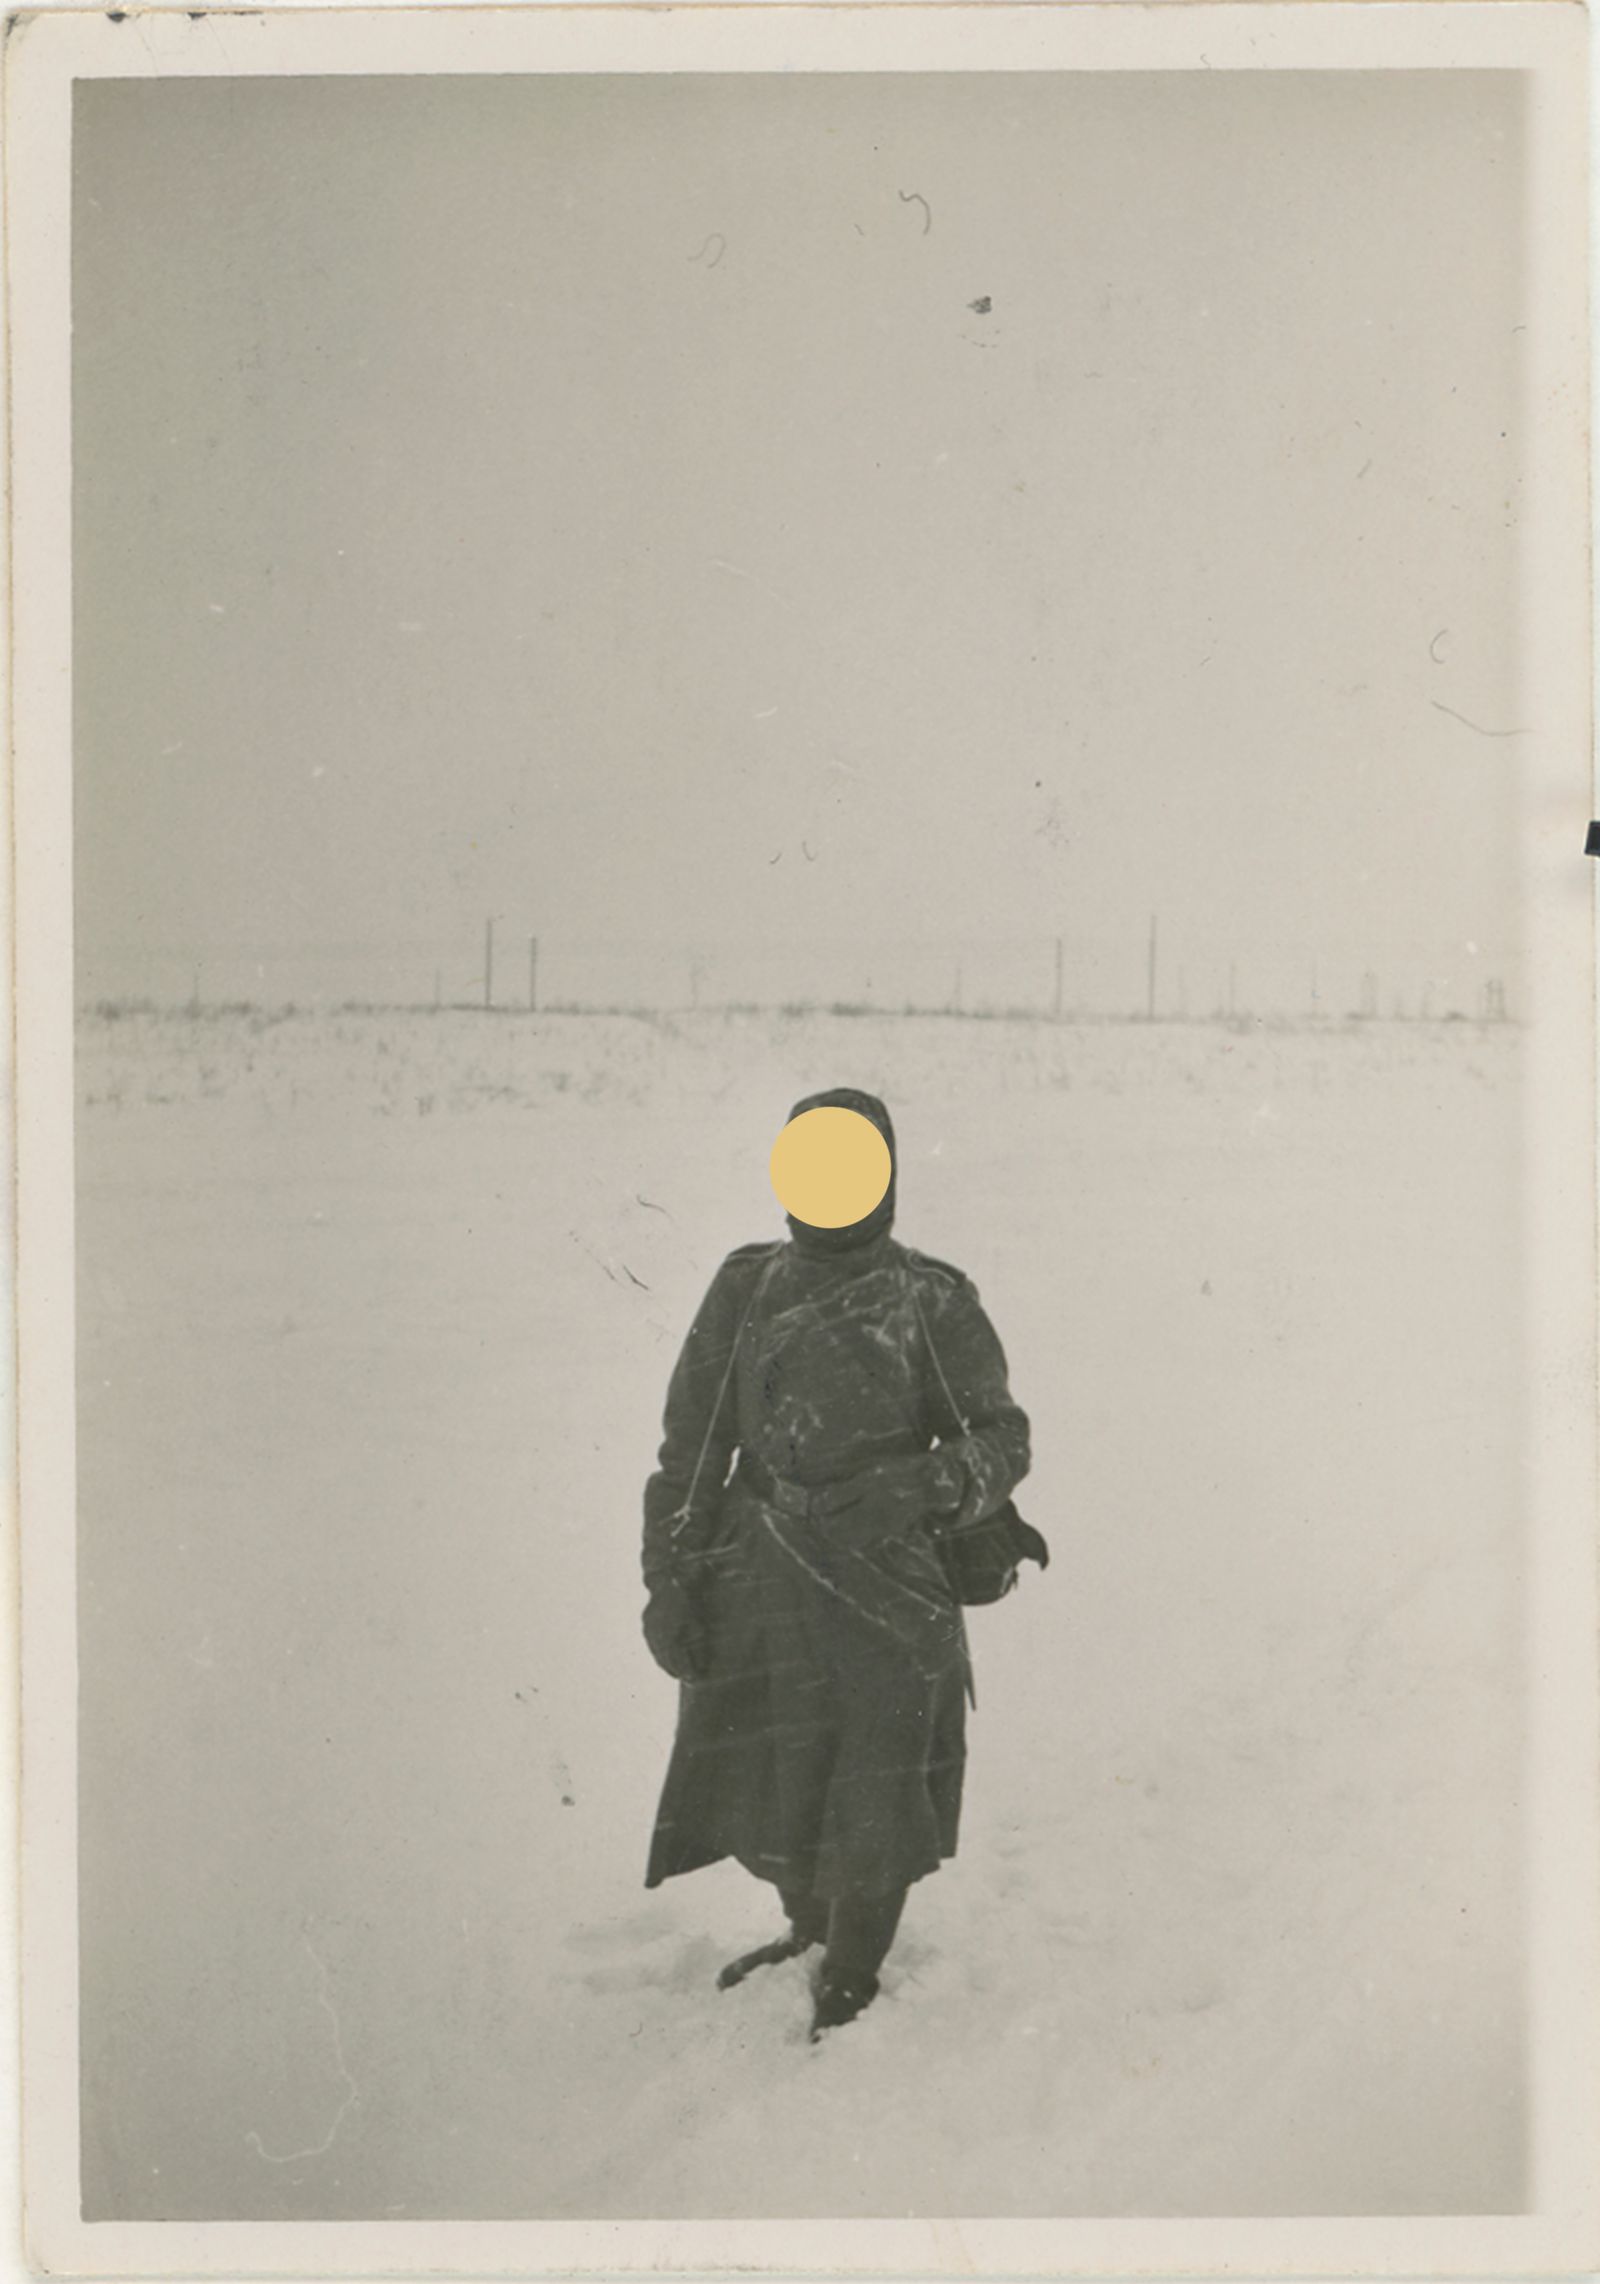 © Sarah Pabst - A photo my grandfather took in 42 in Russia. The dot resembles the holes in my inherited memory.